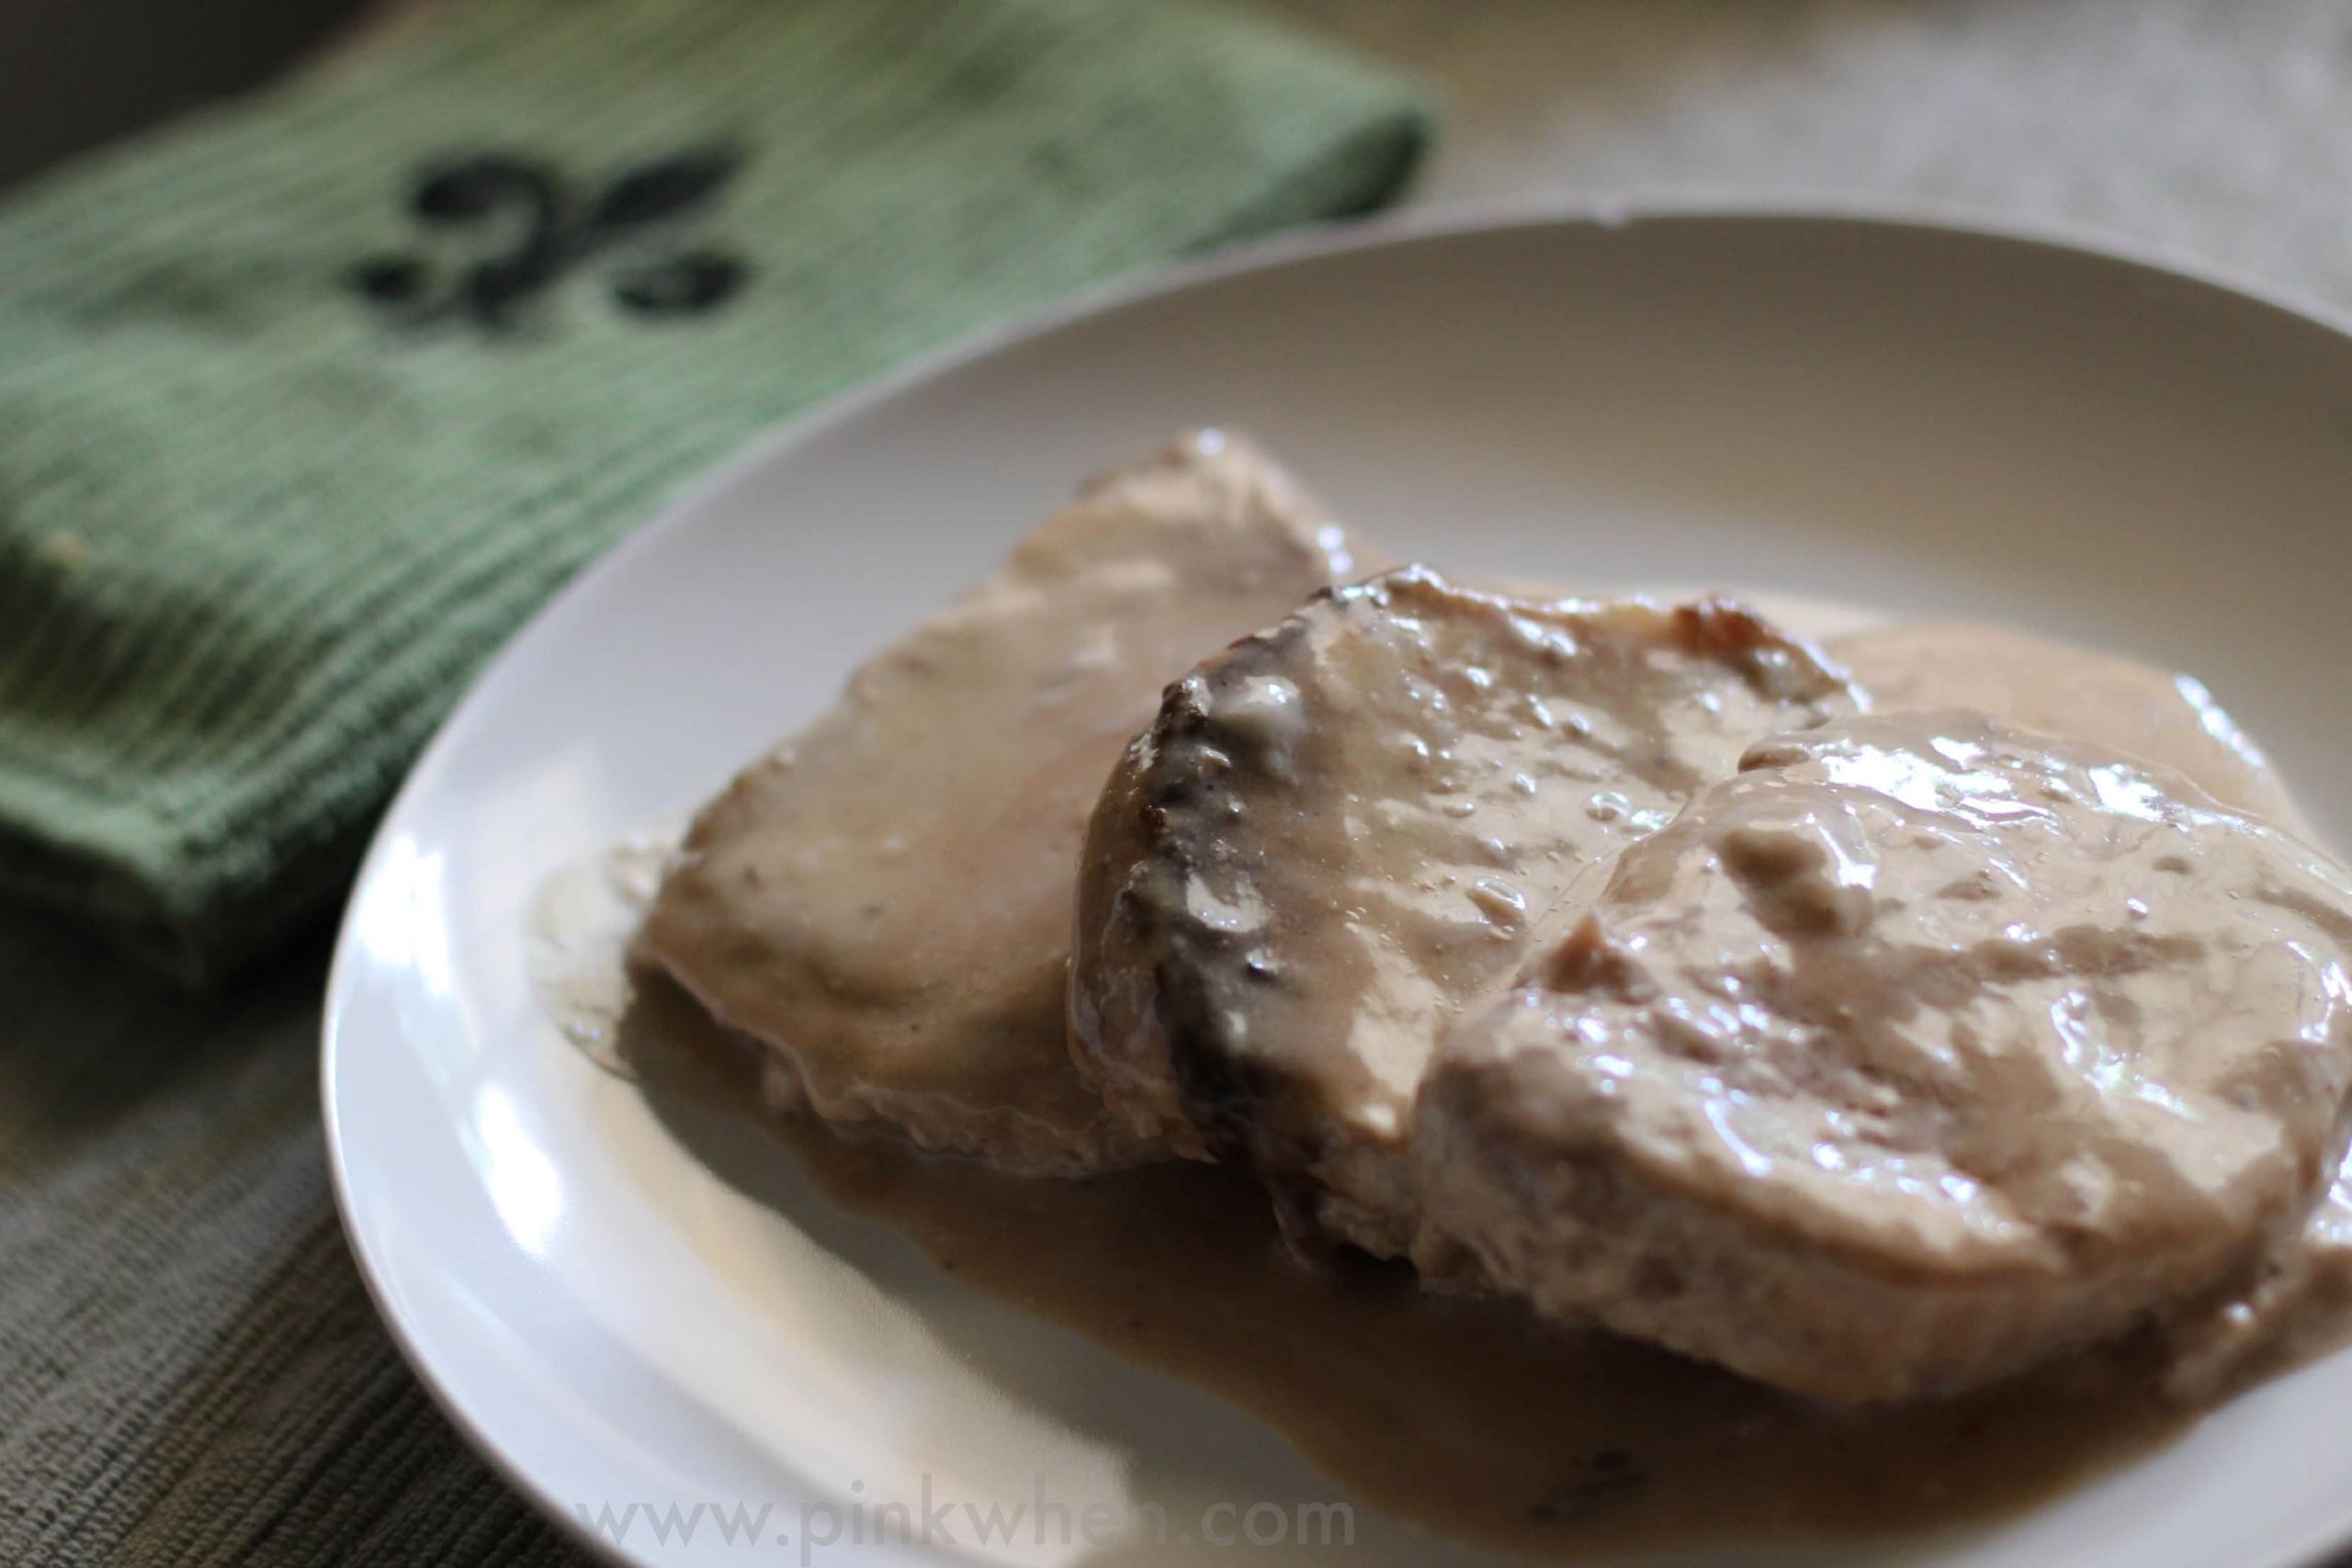 Slow Cooker Pork Chops And Gravy
 Slow Cooker Pork Chops with Gravy Page 2 of 2 PinkWhen